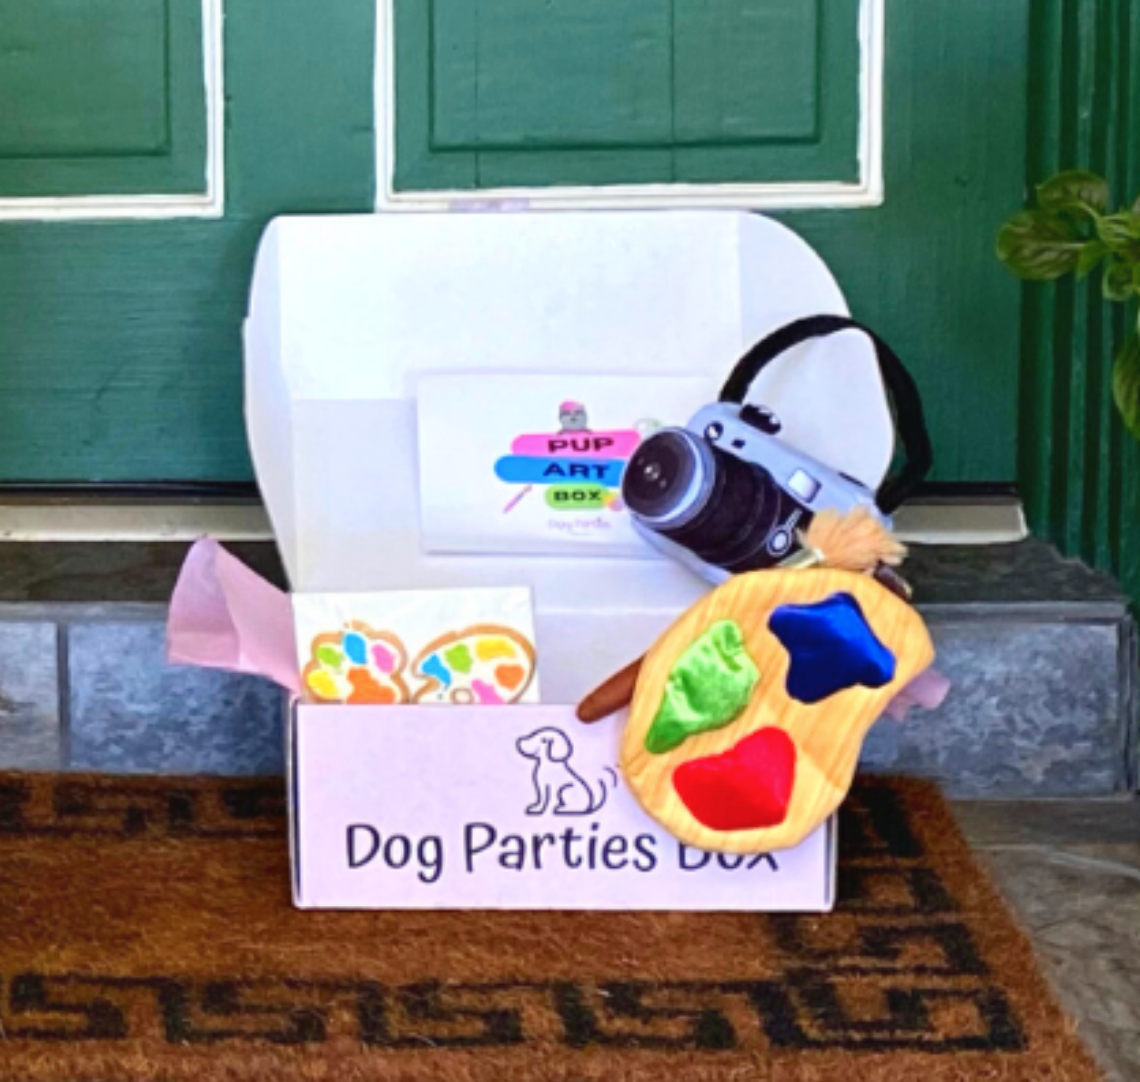 Dog Parties Box Reviews: Get All The Details At Hello Subscription!